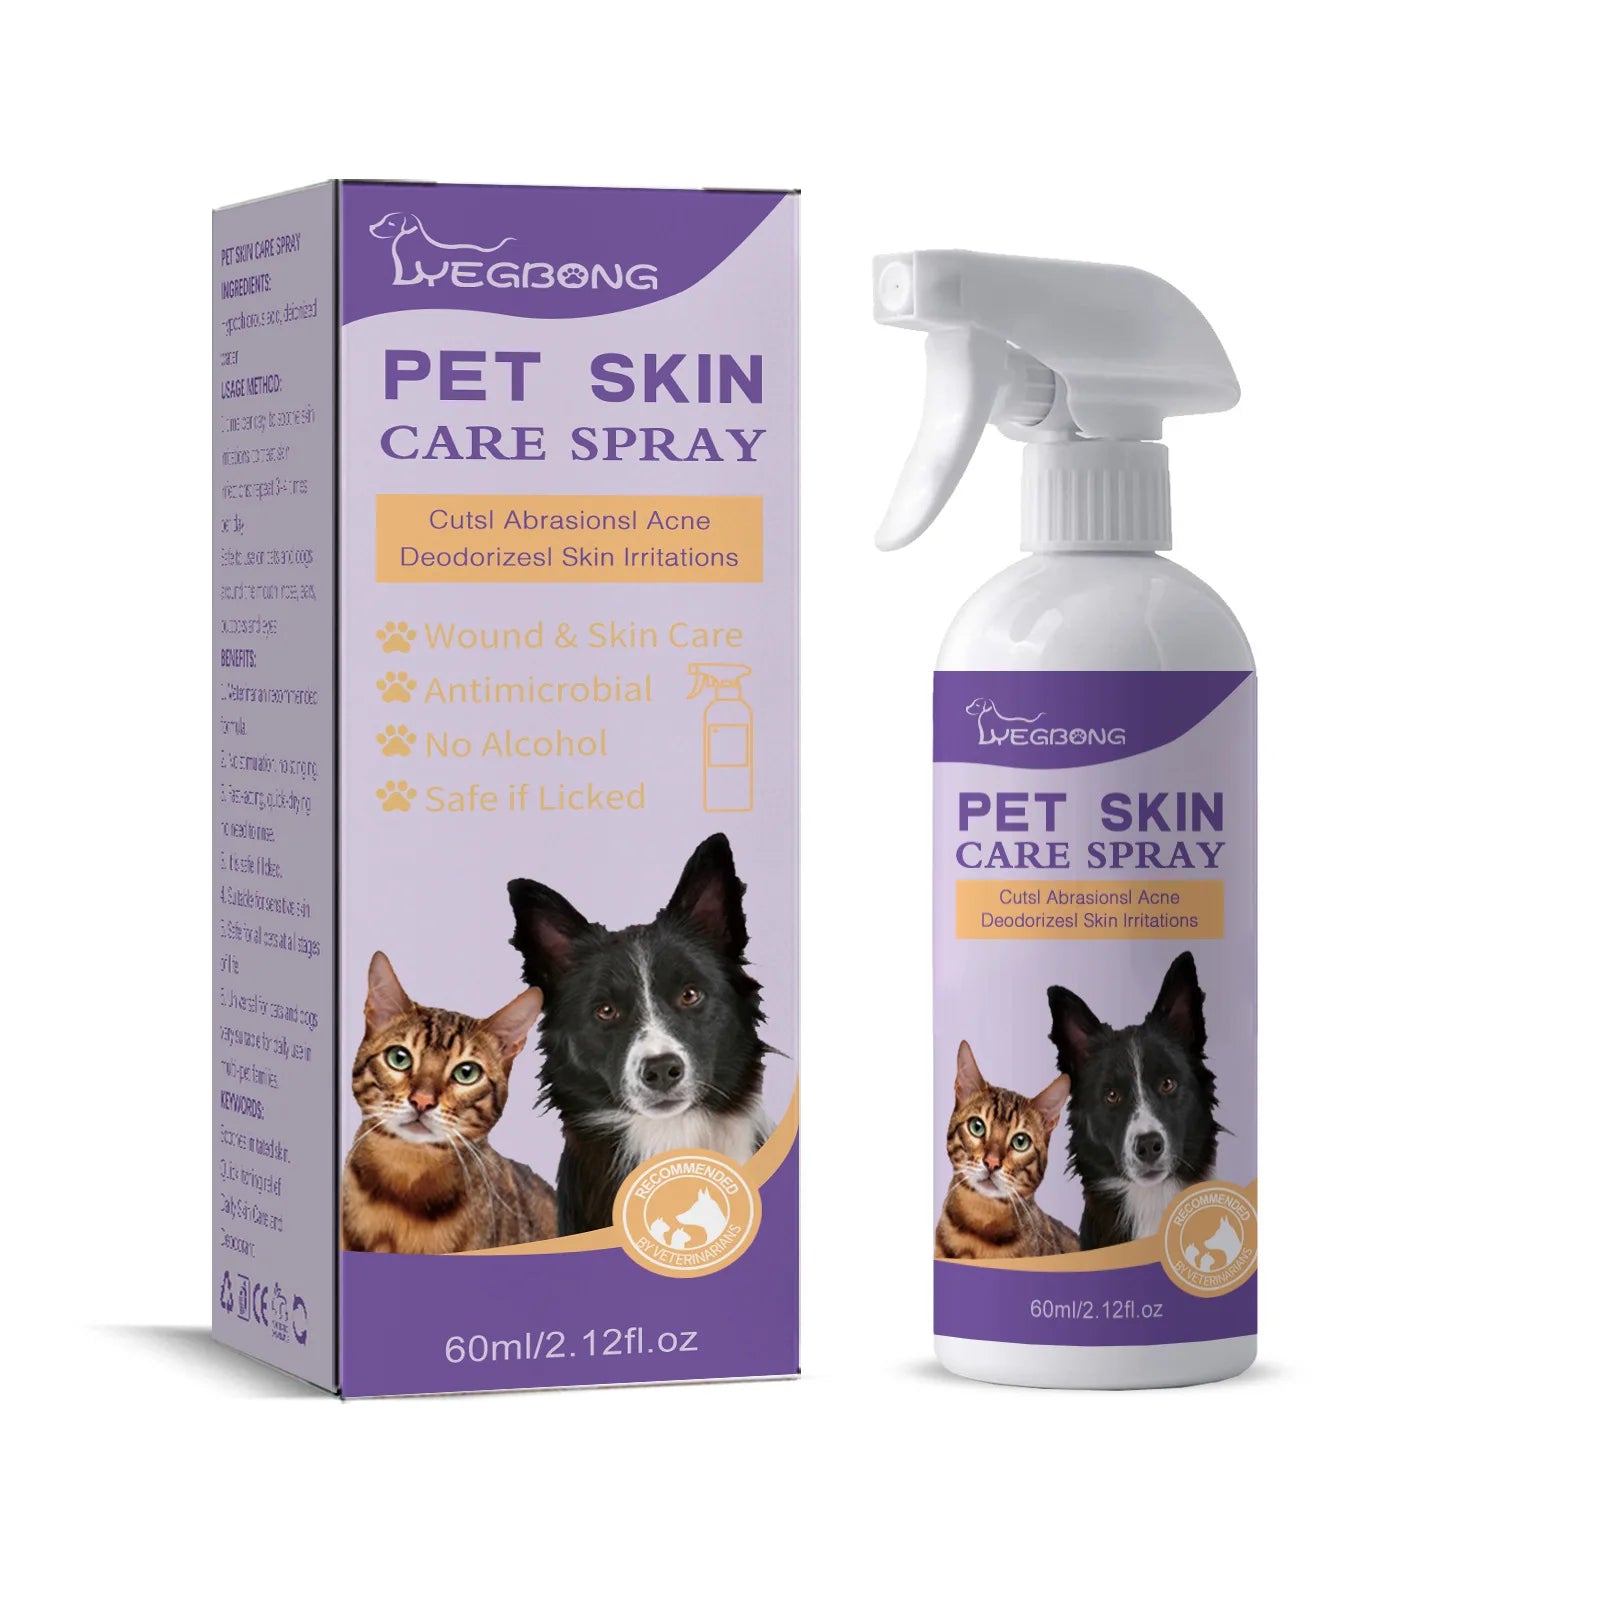 Pet Skin Care Spray Flea Lice Insect Killer Spray For Dog Cat Puppy Kitten Treatment Soothe Itching Remove Mites Eliminator 60ml